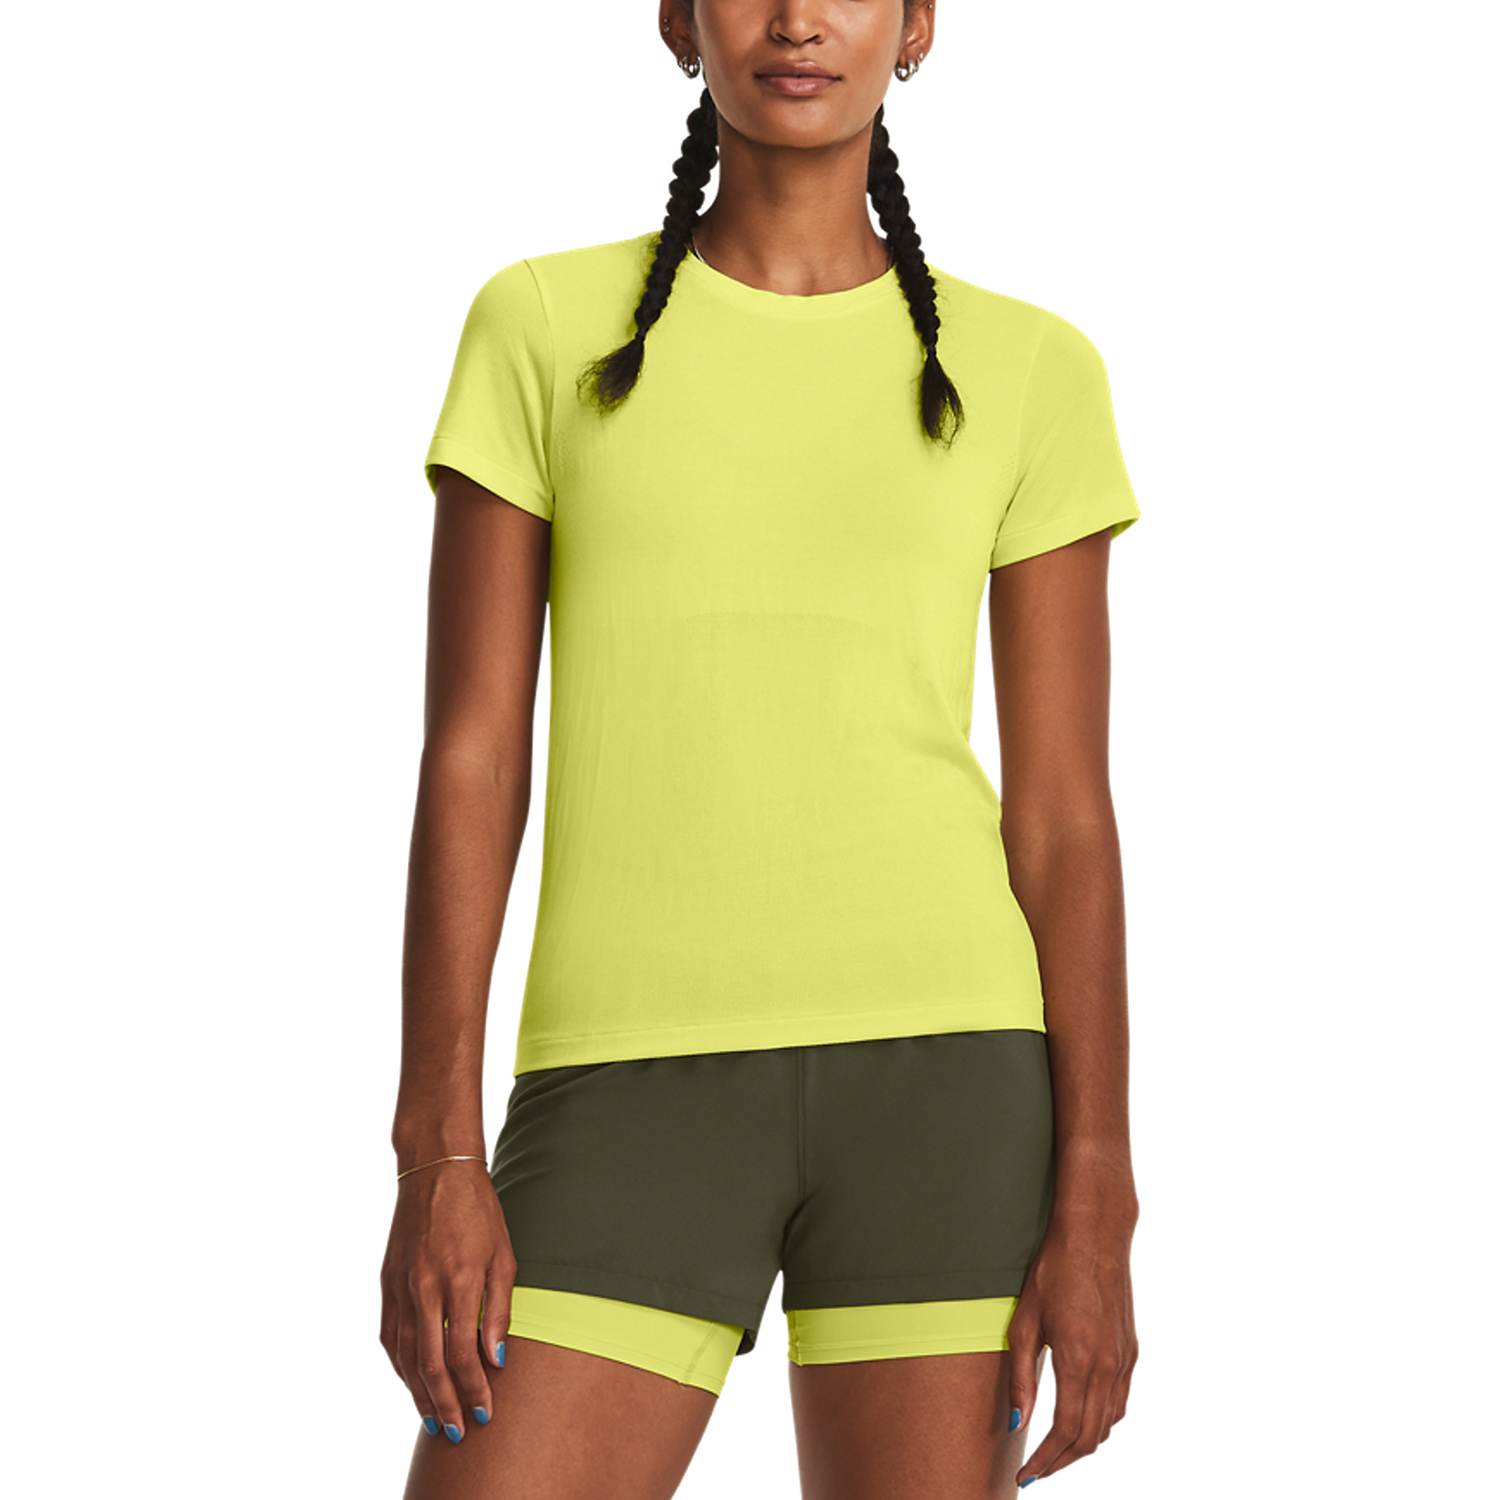 Under Armour Seamless Stride Maglietta - Lime Yellow/Reflective